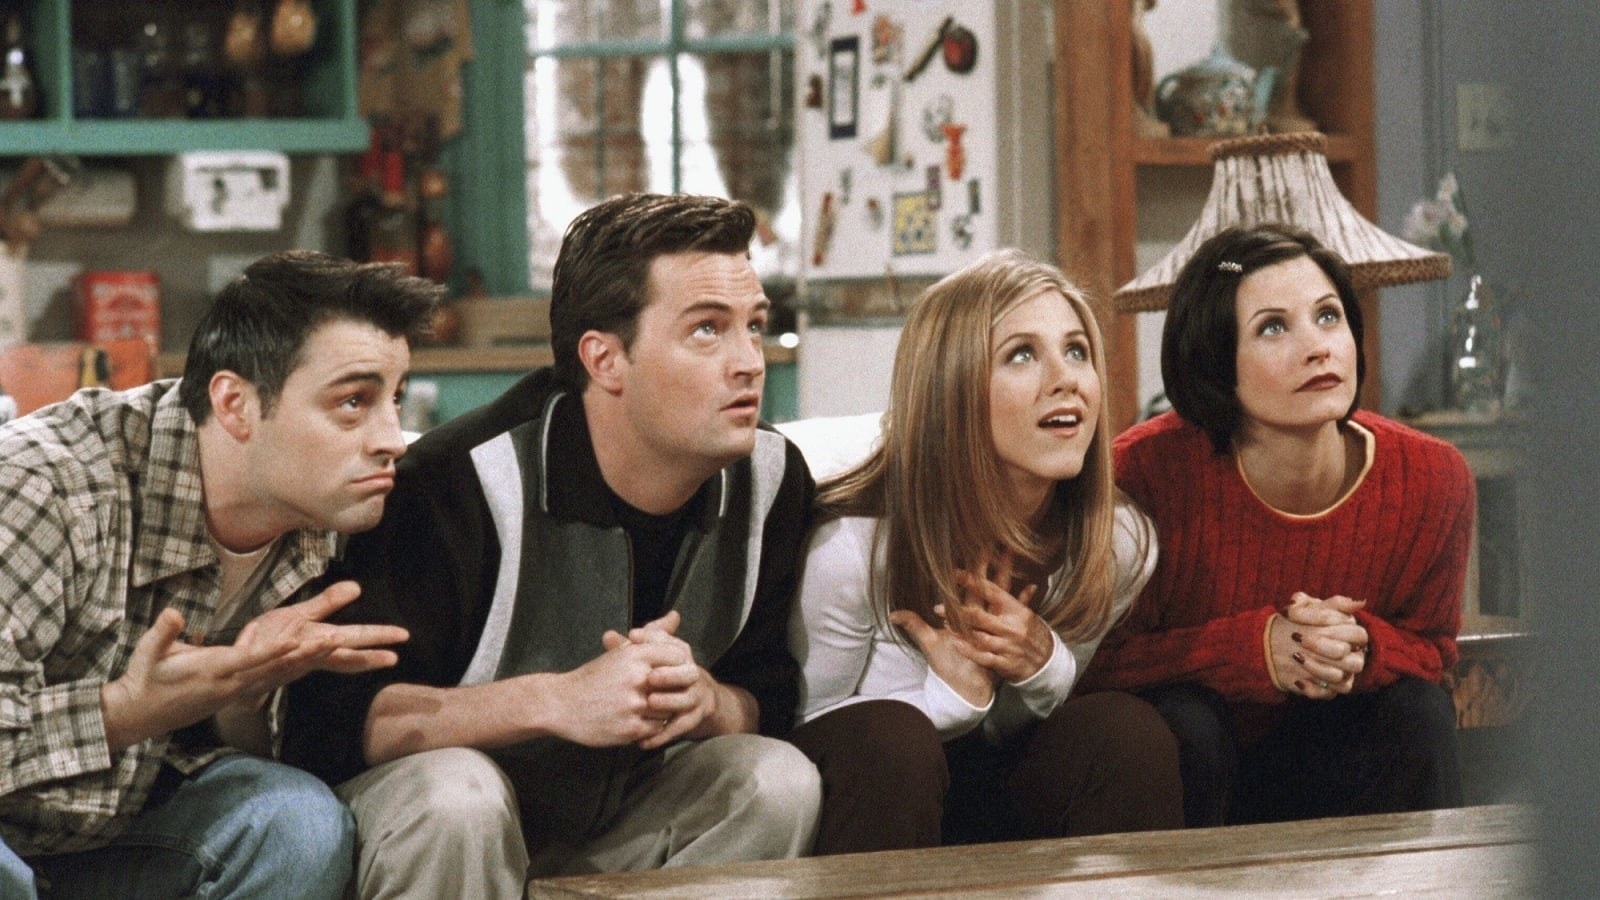 Joey, Chandler, Rachel, and Monica looking up expectantly 